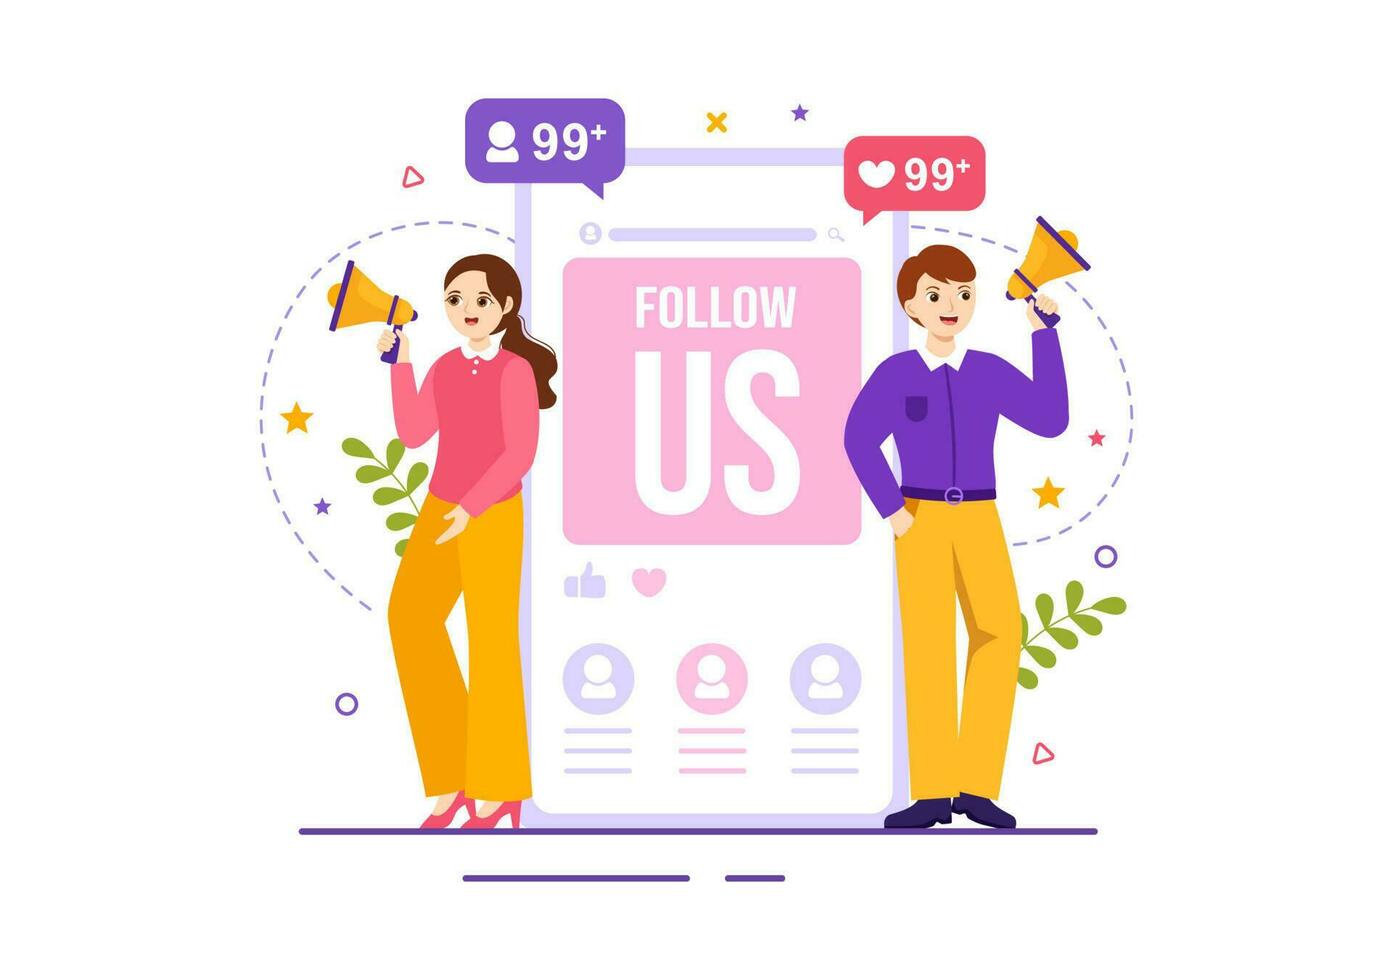 Follow Us and Like Vector Illustration for Internet Advertisement of a Social Media Users Following an Interesting Page in Hand Drawn Templates